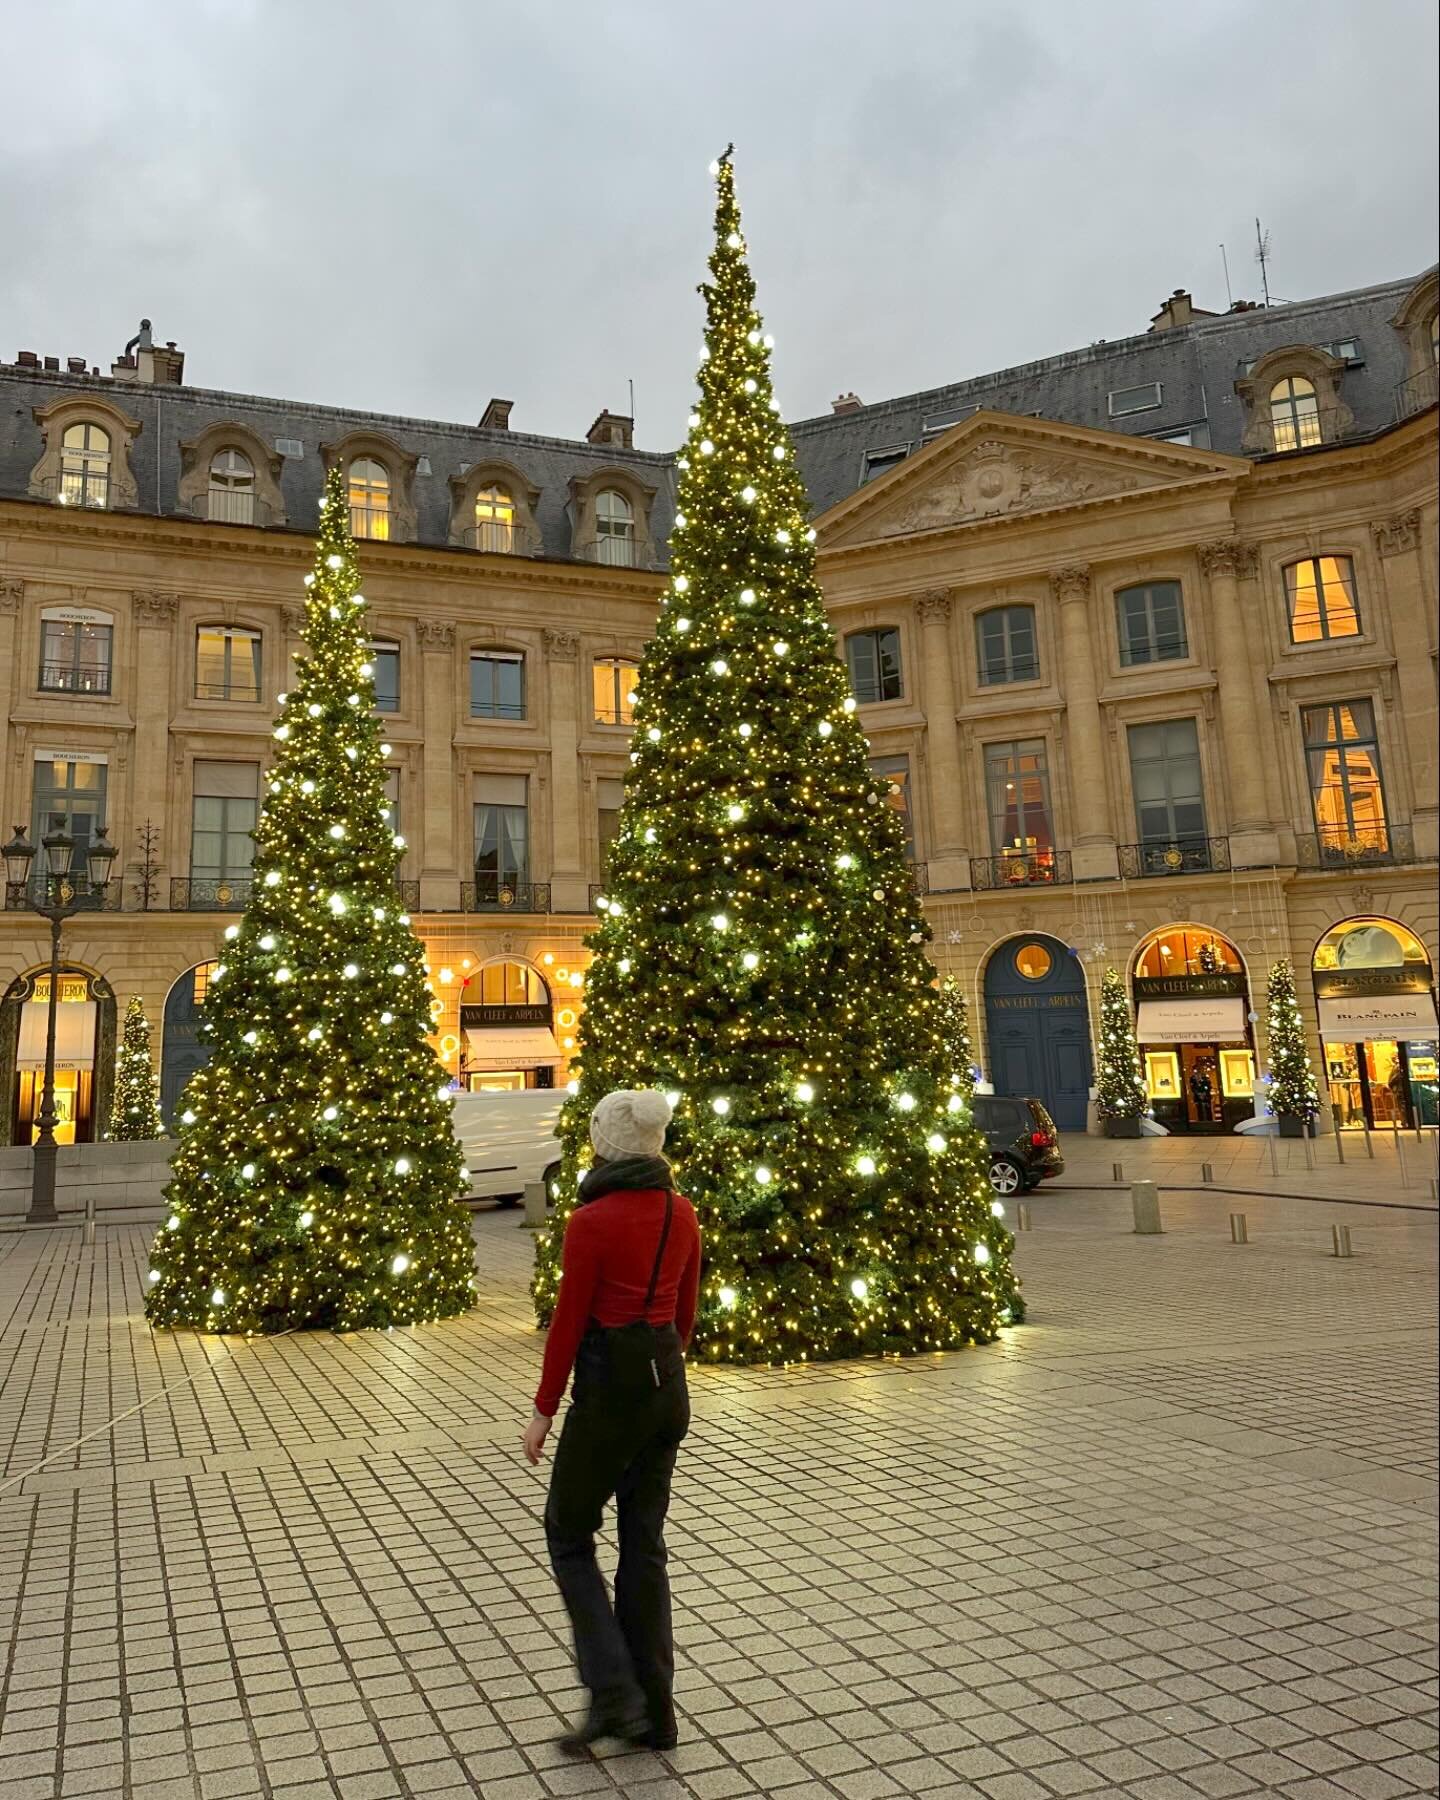 Favorite moments from Paris 
1. the sparkling lights on the trees all around Place Vend&ocirc;me - pure magic
2. first meal after arriving - had to be a brasserie 
3. trying for a vibey &ldquo;me on the streets of Paris&rdquo; pic with my bag of sand